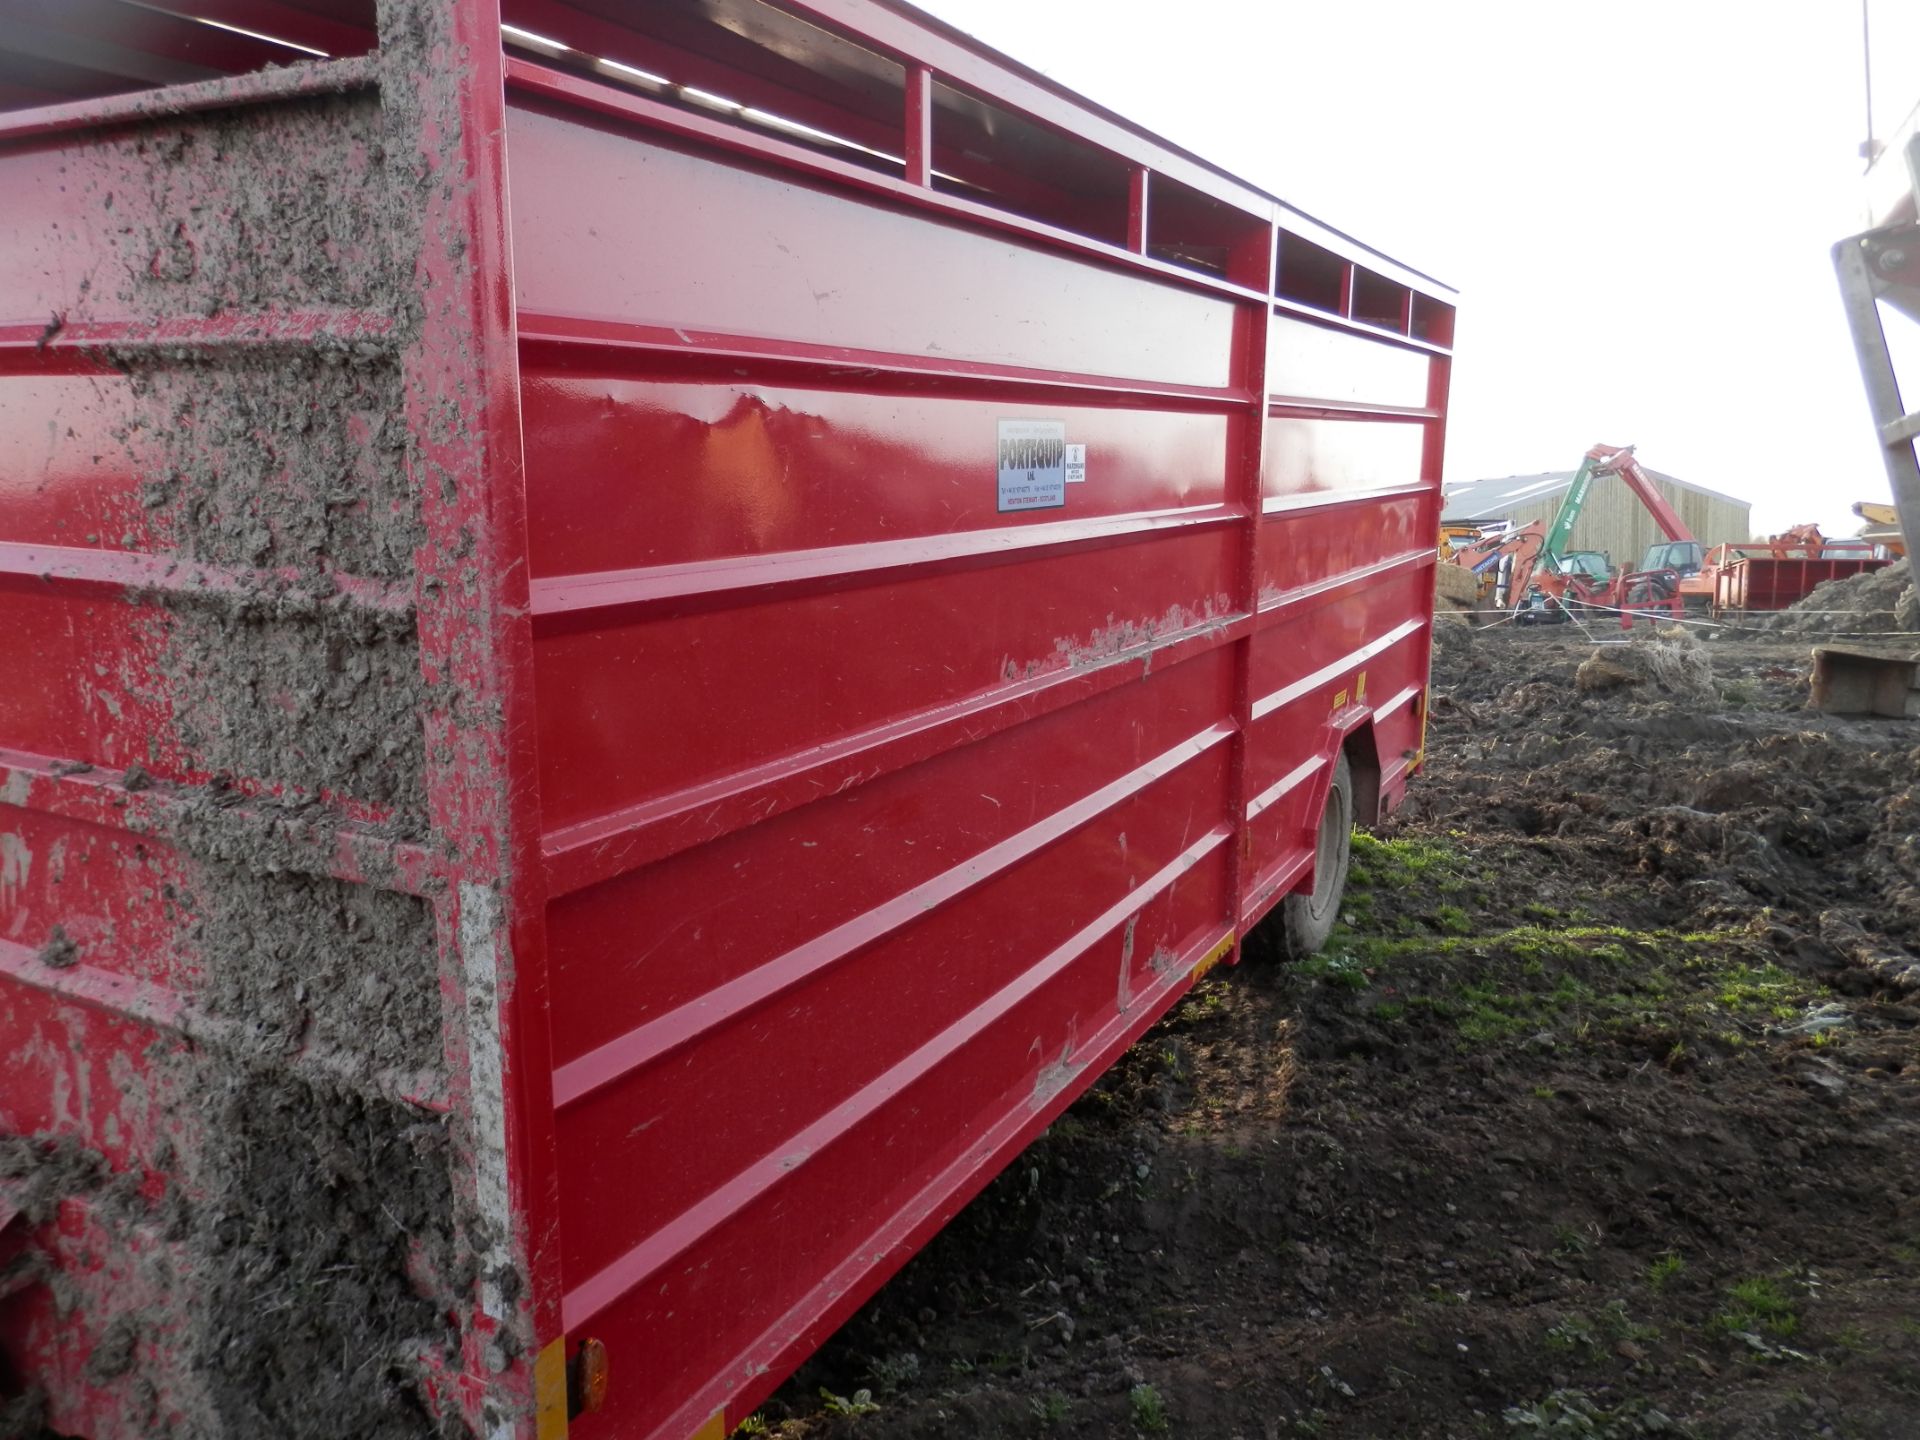 2016 PORTAQUIP 8 TONNE CATTLE TRAILER, GREAT CONDITION, READY TO USE. - Image 8 of 8